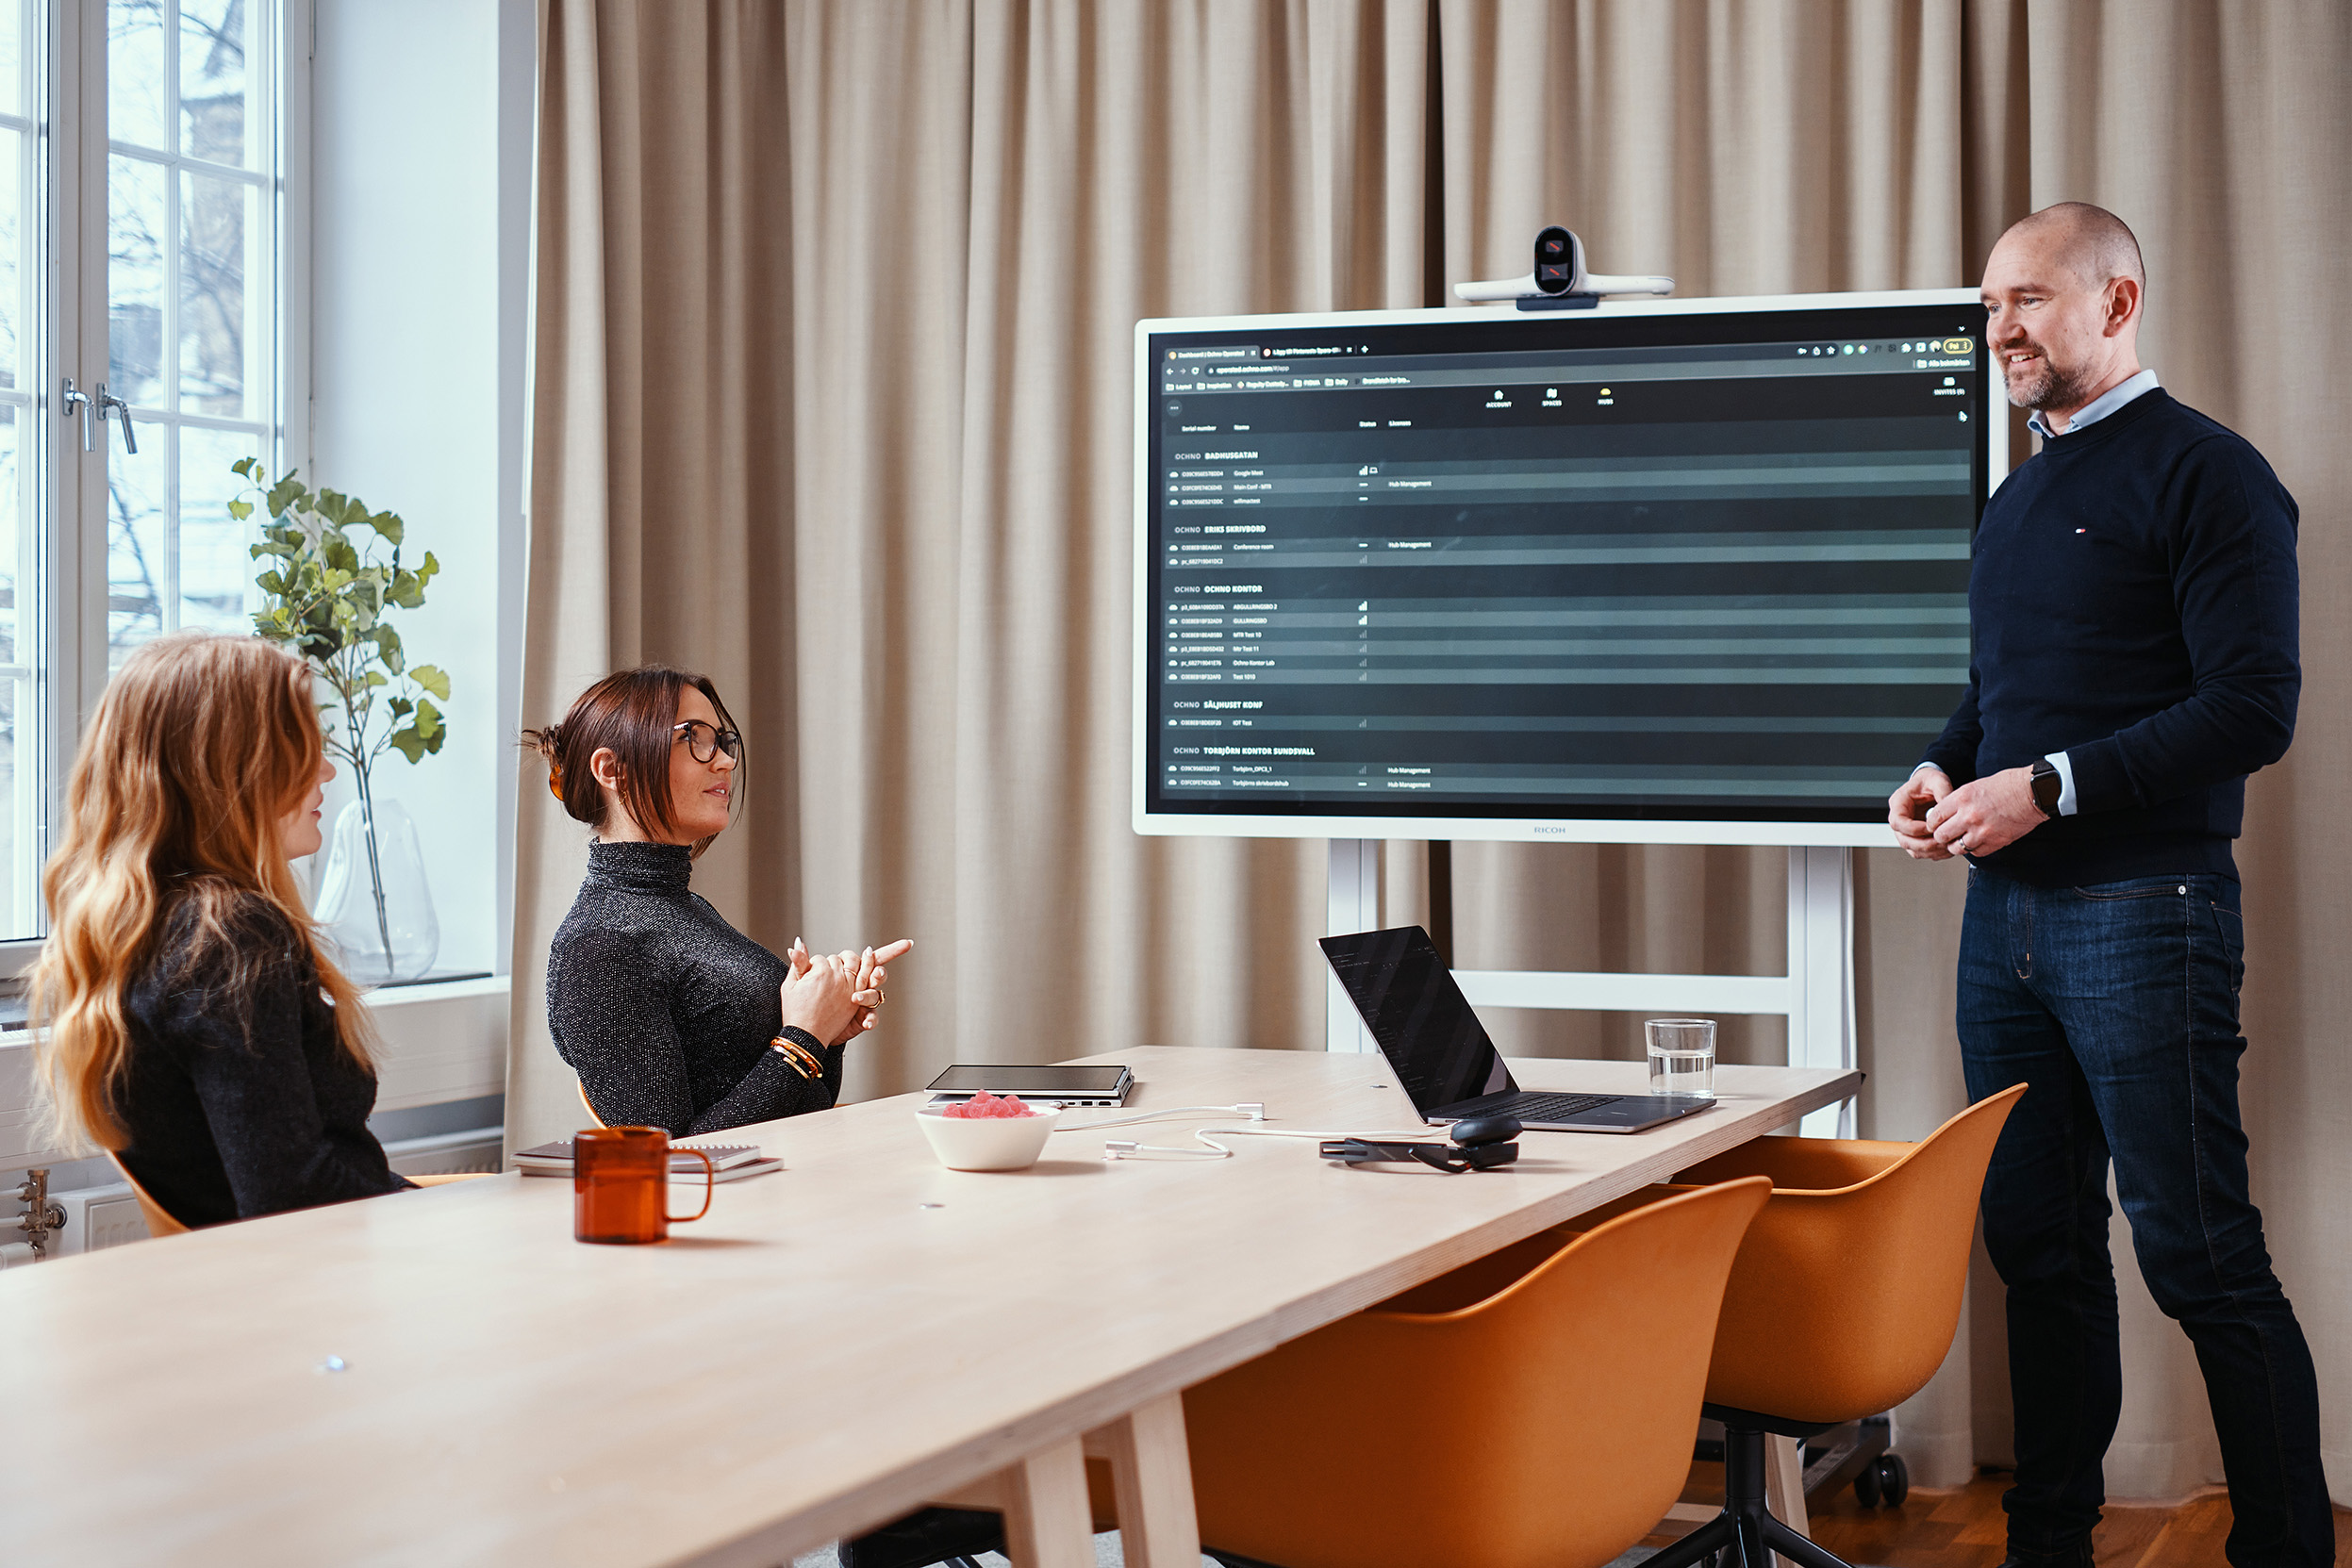 OCHNO creates a user-friendly meeting room. Users can switch between their own devices and the permanent conference system, share media content seamlessly and charge their devices at the same time. Just one cable necessary!